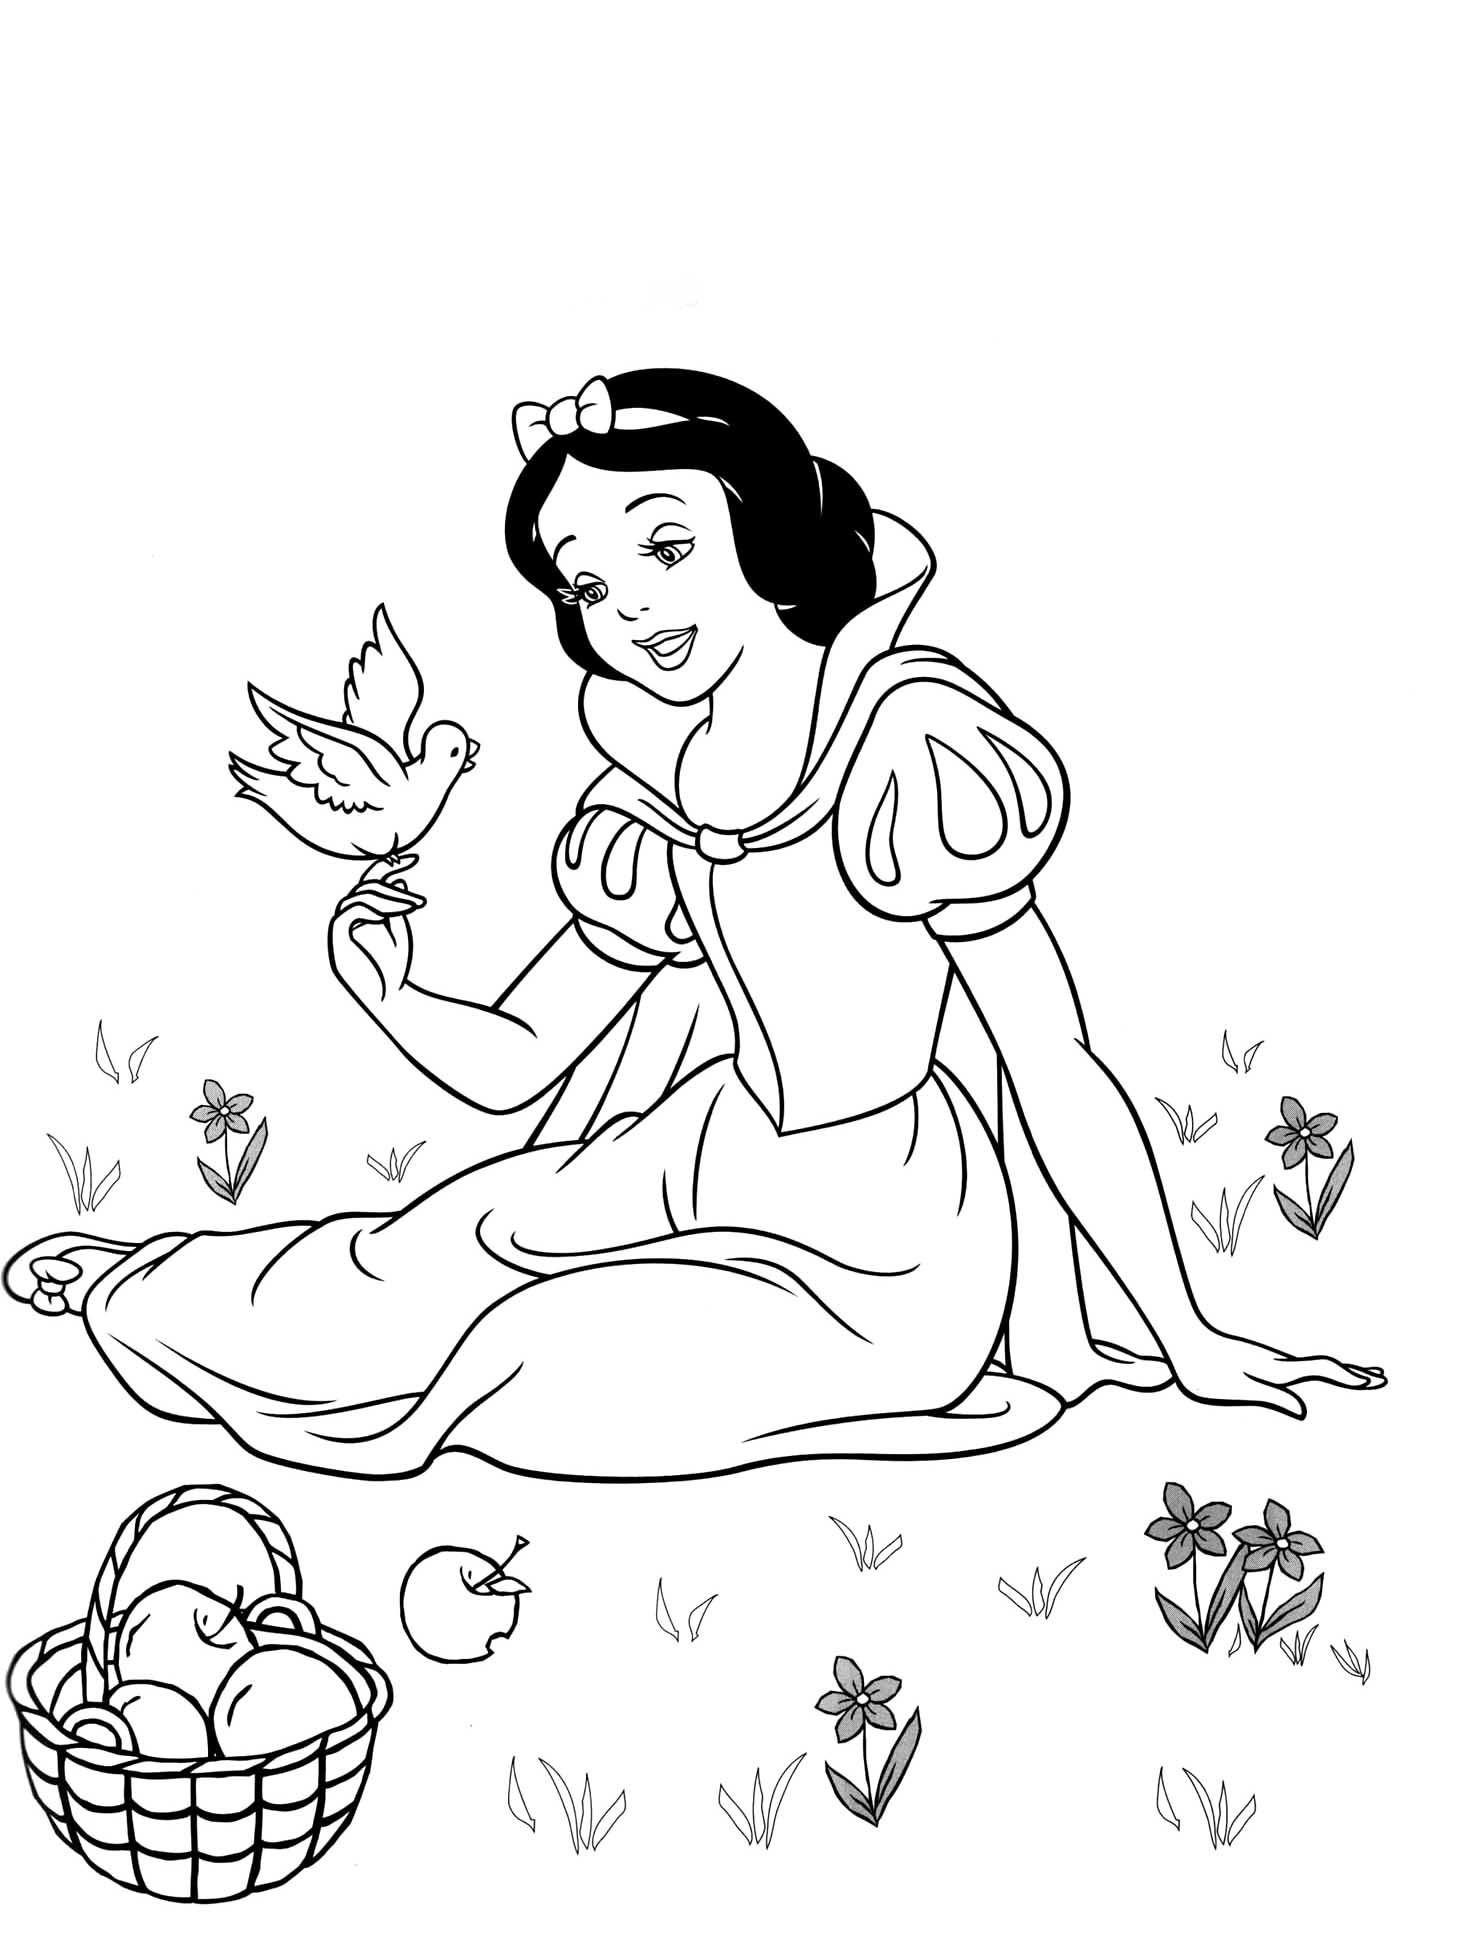 Snow White Coloring Book Free - High Quality Coloring Pages